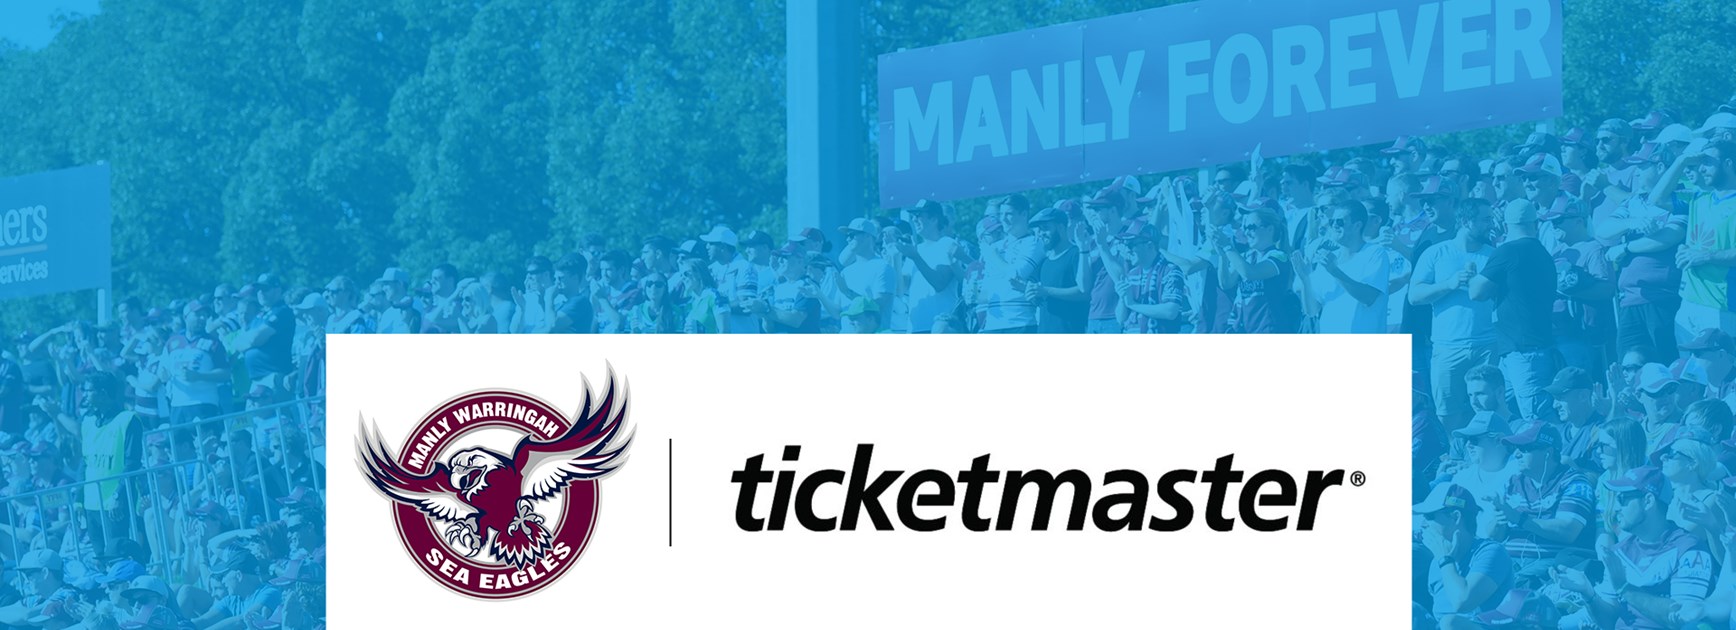 Sea Eagles renew Ticketmaster partnership for a further 6 years